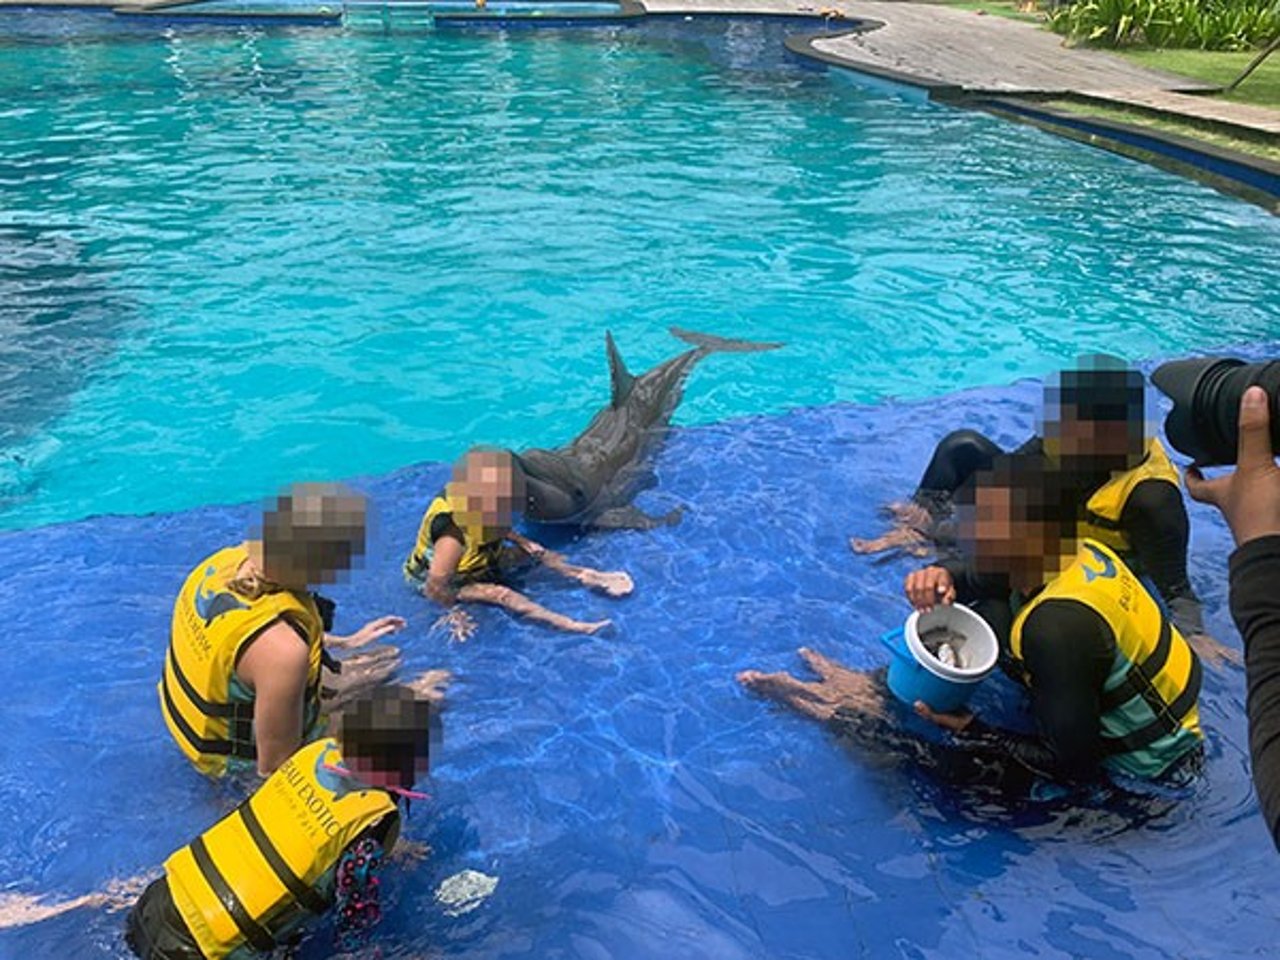 A group of tourists of all ages crowd around a dolphin in a pool in Bali.